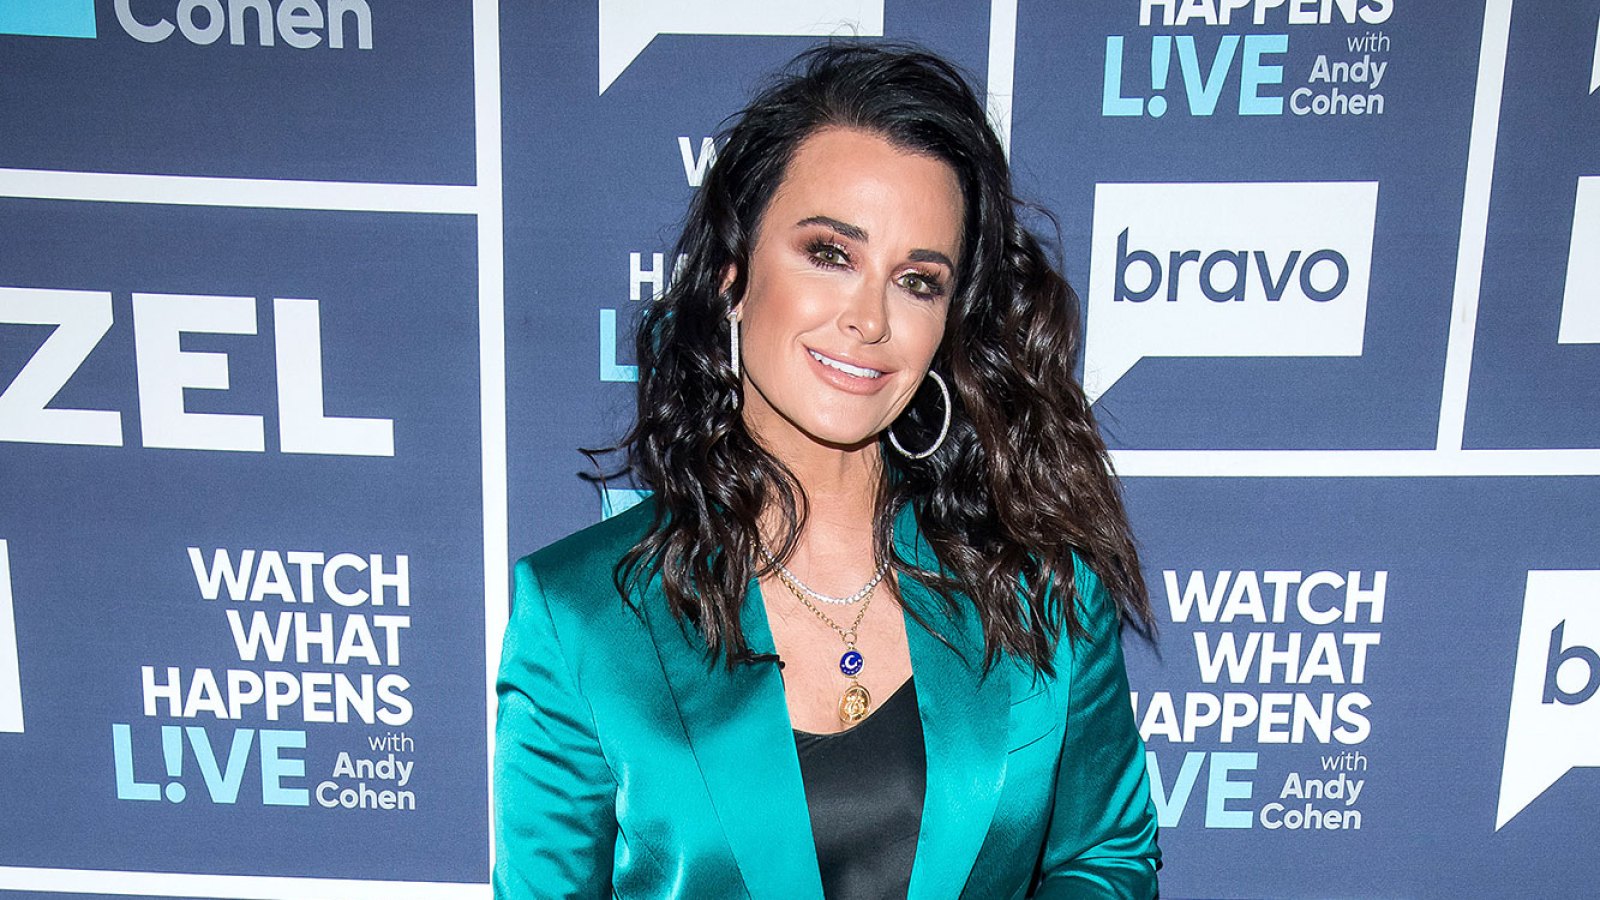 Kyle Richards Claps Back After Troll Asks If She Bribed Daughter’s Way Into Prestigious University